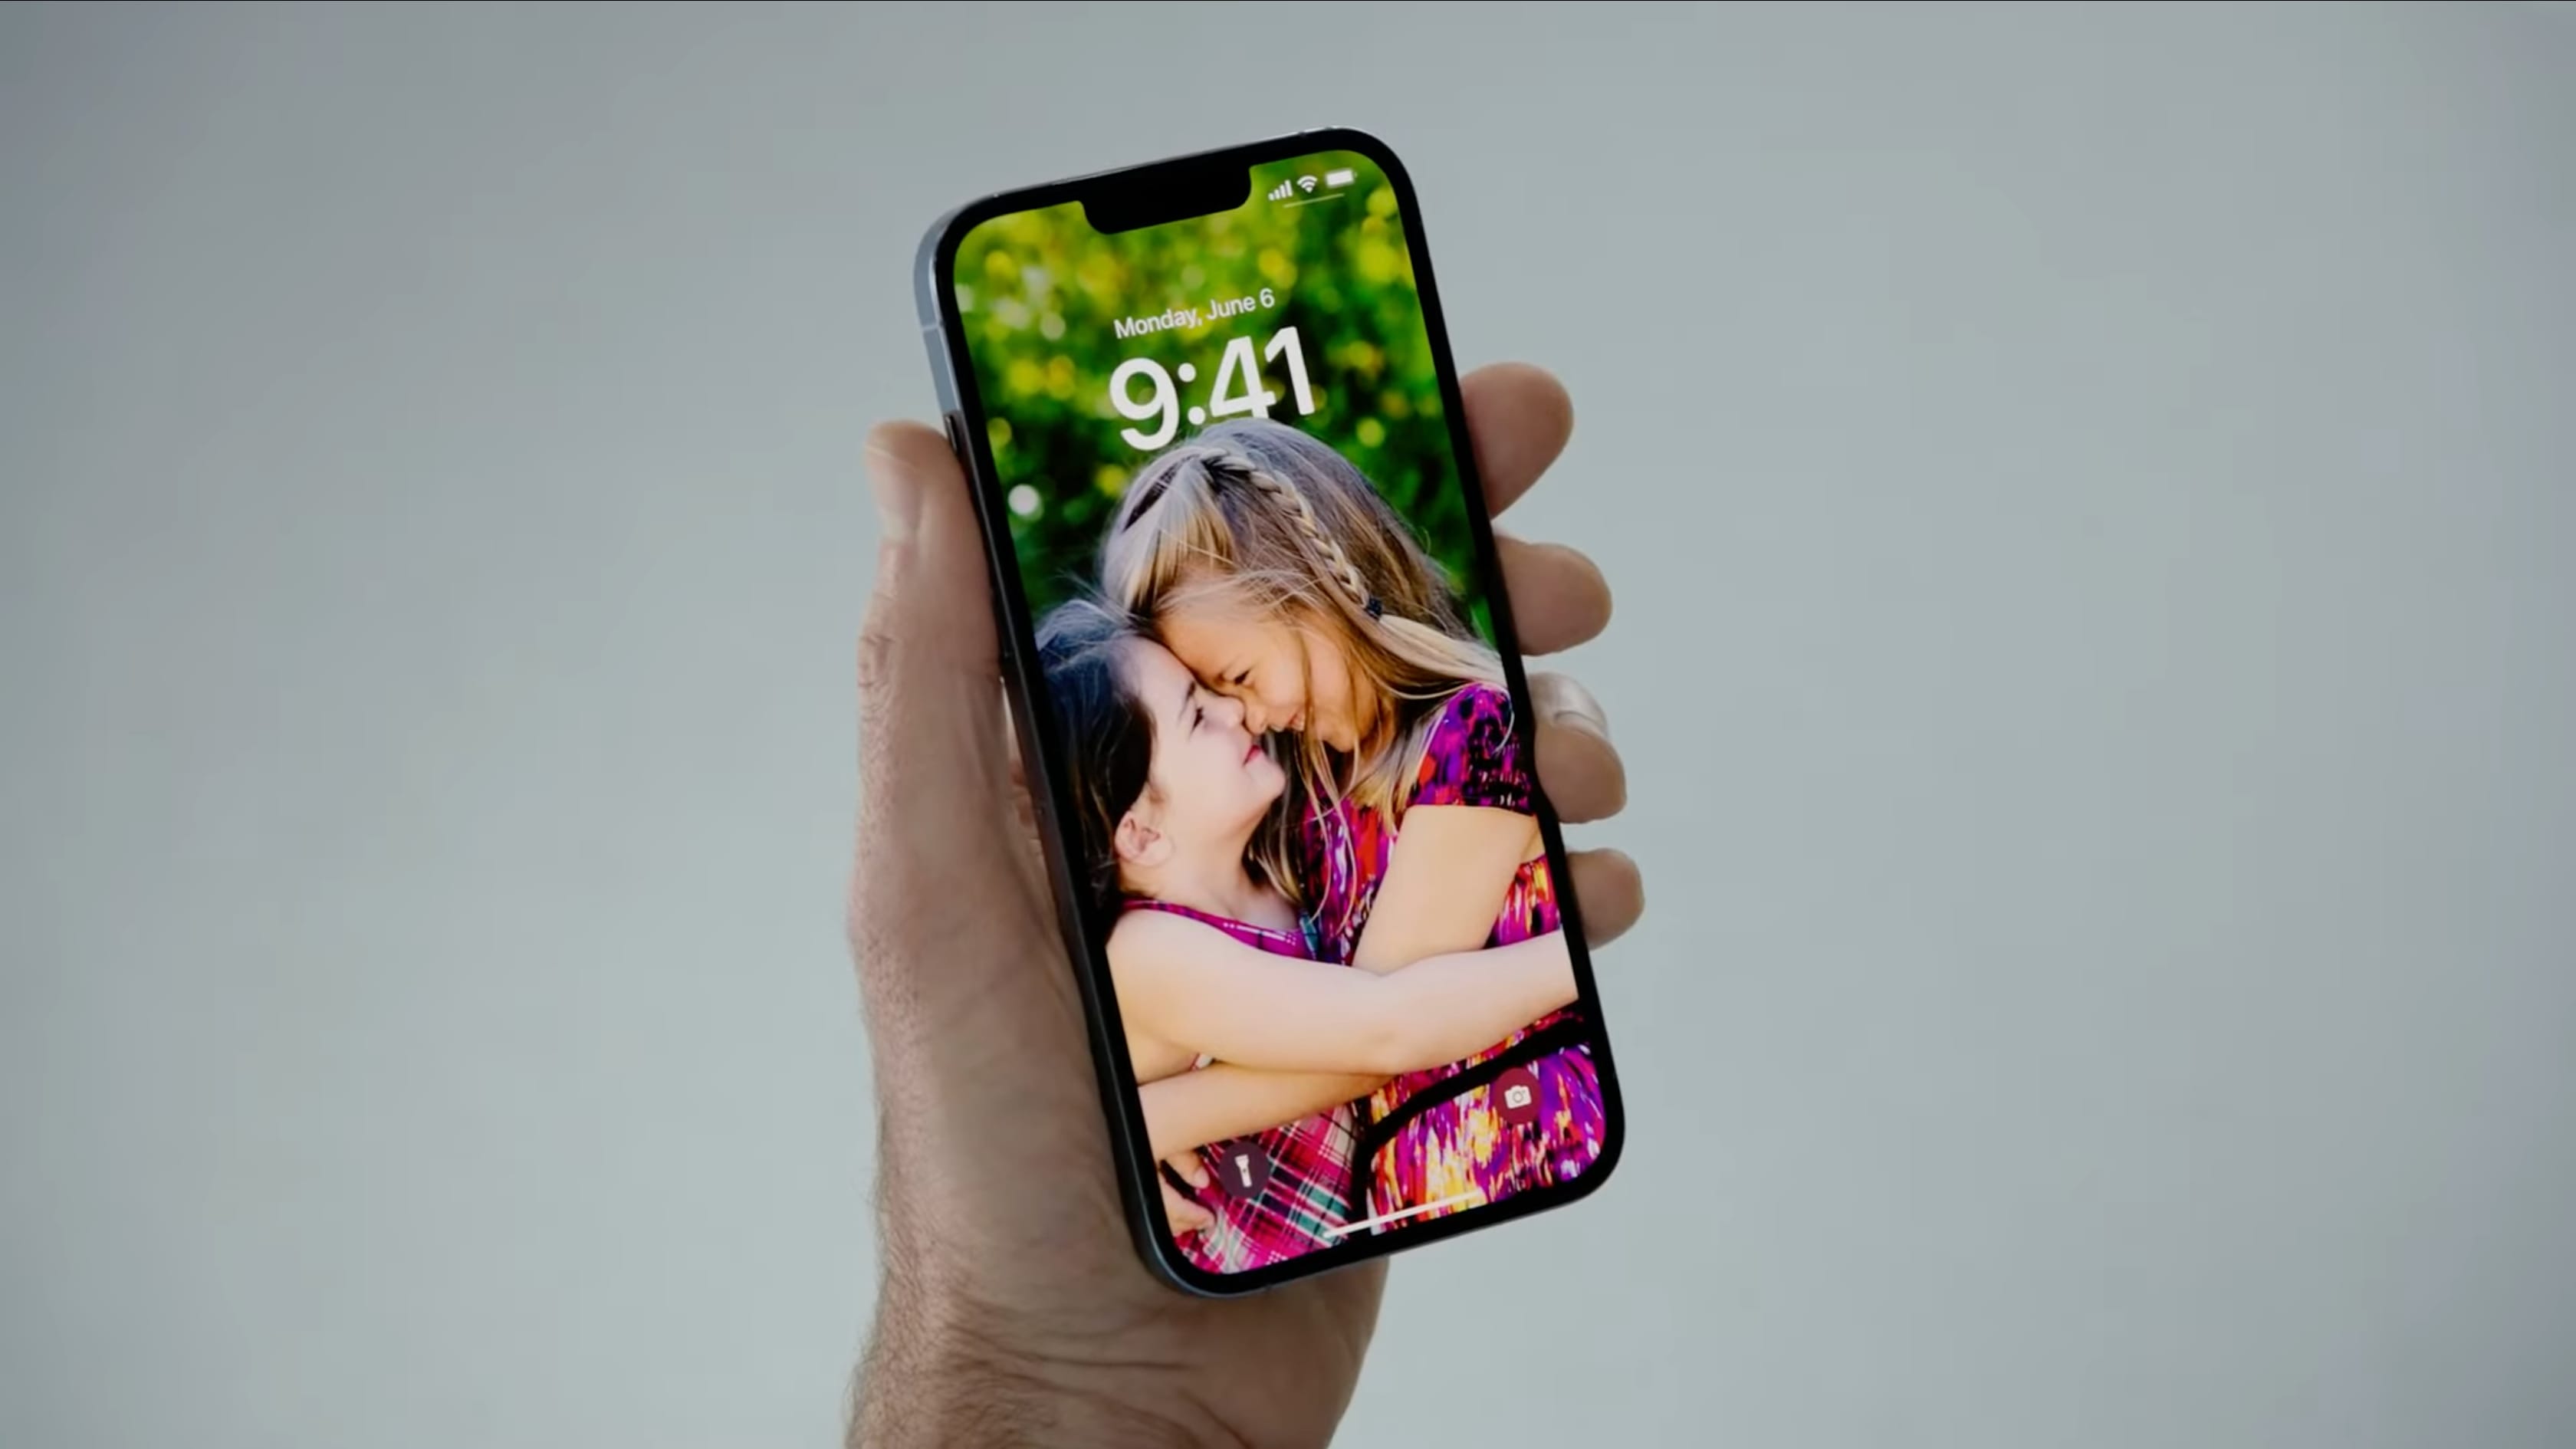 Customizing iOS 16's iPhone lock screen using the Photo theme is showcased in this still image grabbed from Apple's WWDC 2022 keynote video